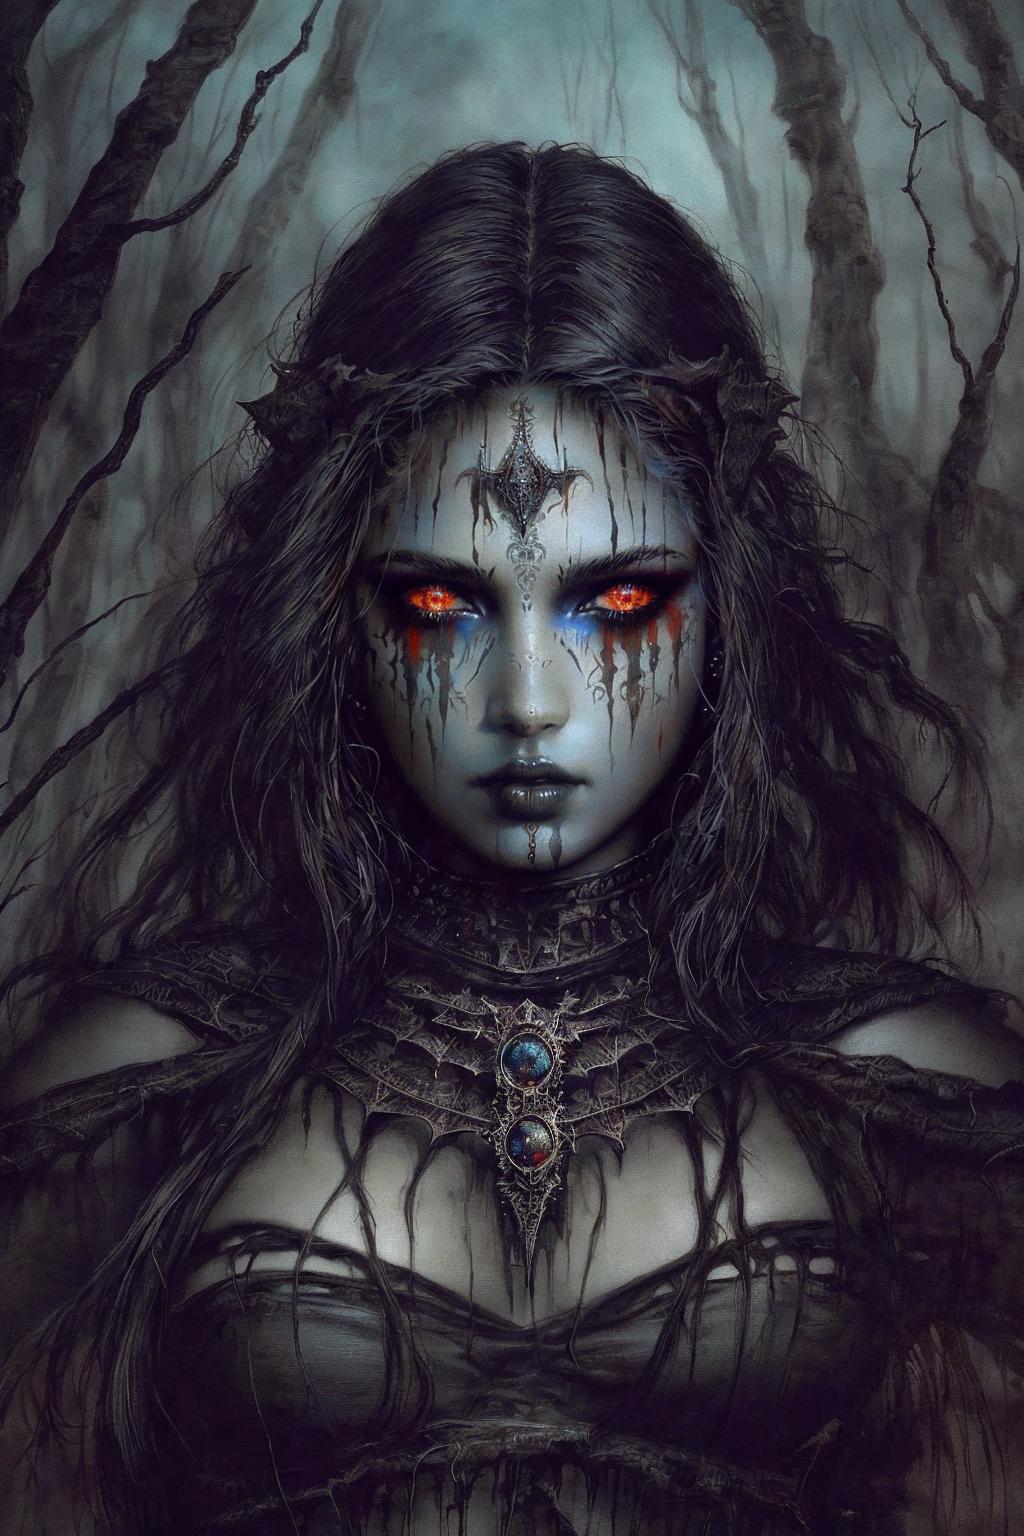 A dark and eerie painting of a woman with red eyes and a spider web necklace.